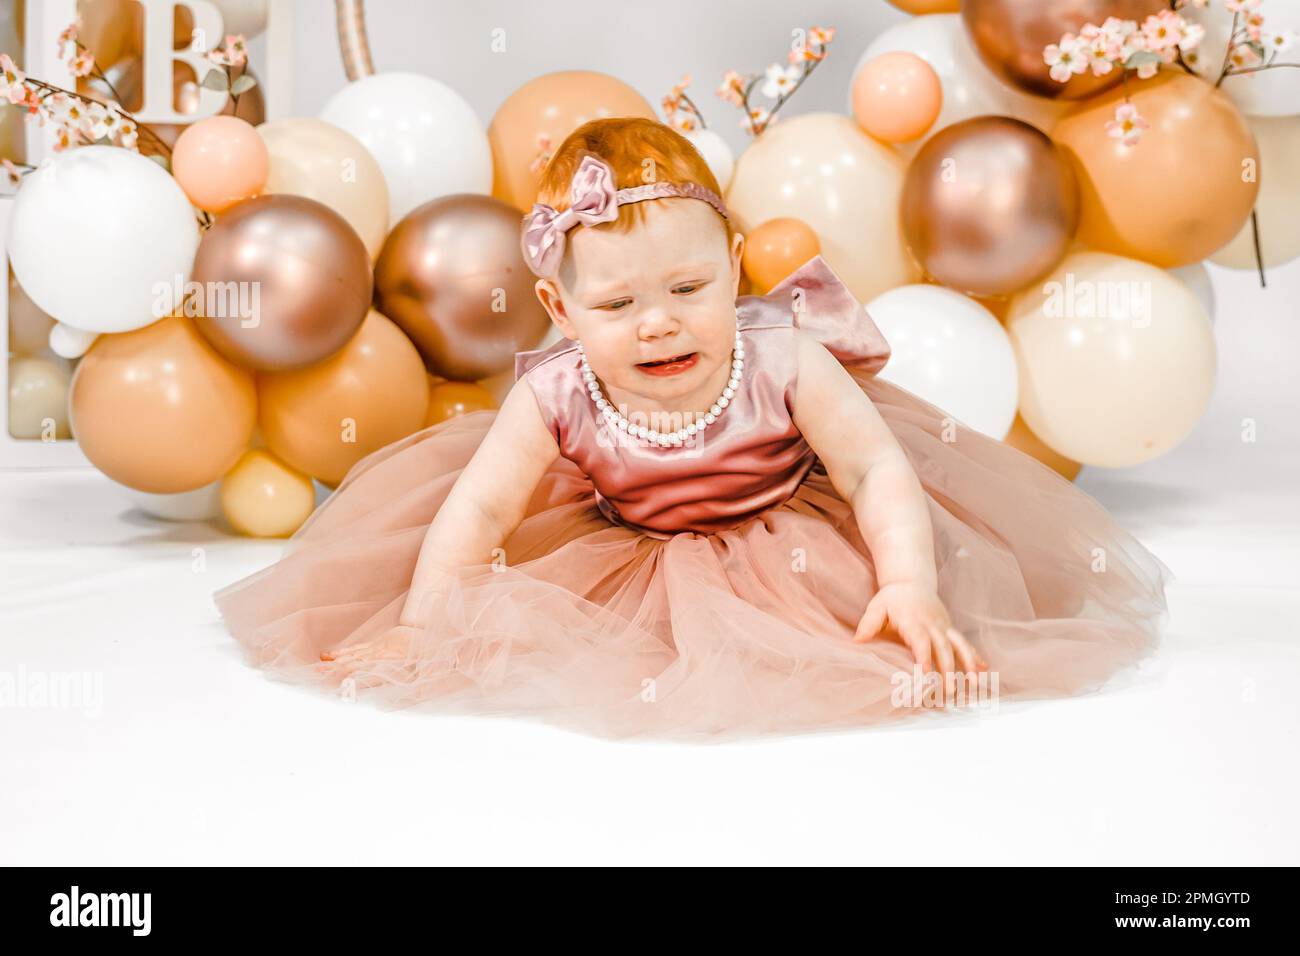 Little crying unhappy redhead baby girl celebrates first birthday anniversary. 1 year family party Professional photoshoot in photo studio. Cute adora Stock Photo